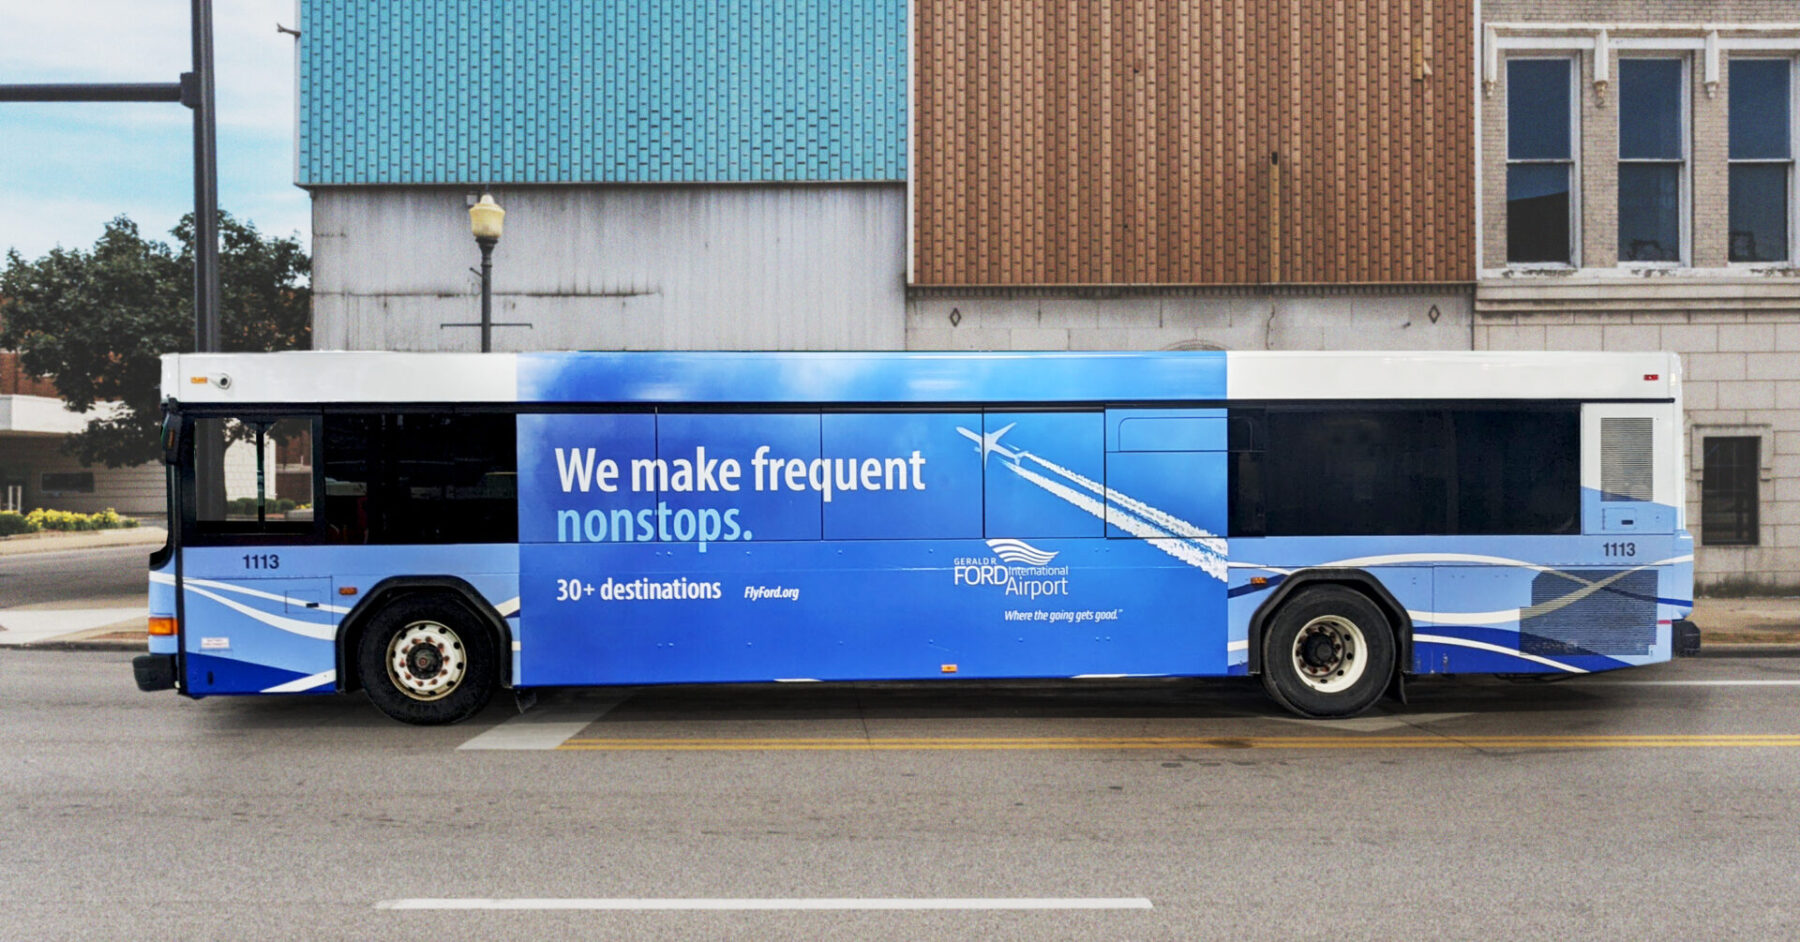 Bus out of home advertisement with headline "We make frequent nonstops"